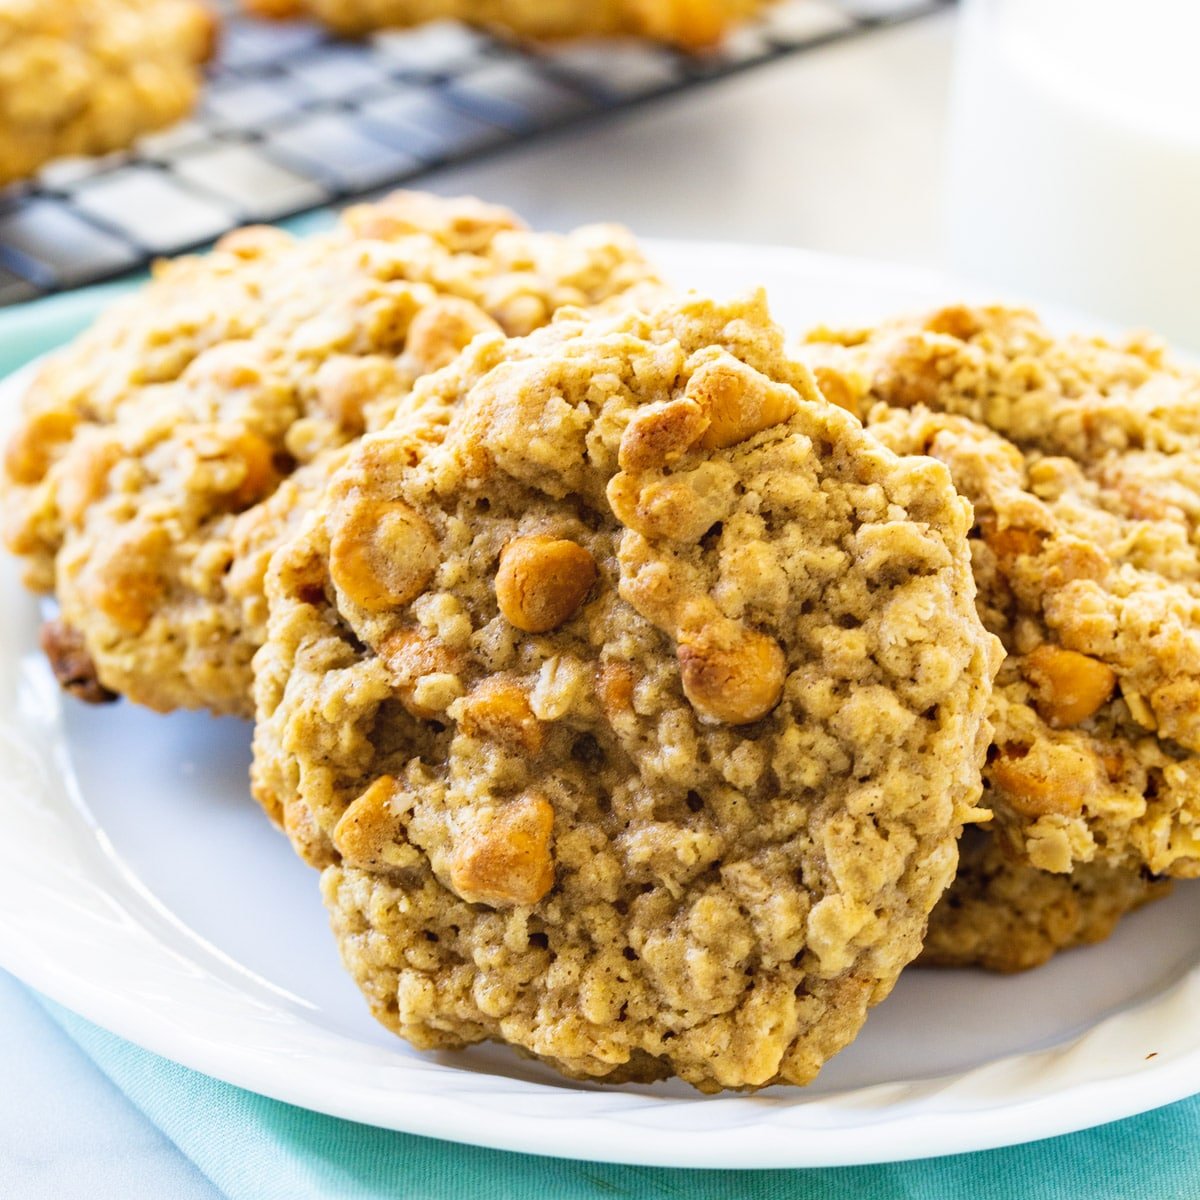 Oatmeal Butterscotch Cookies on a plate.